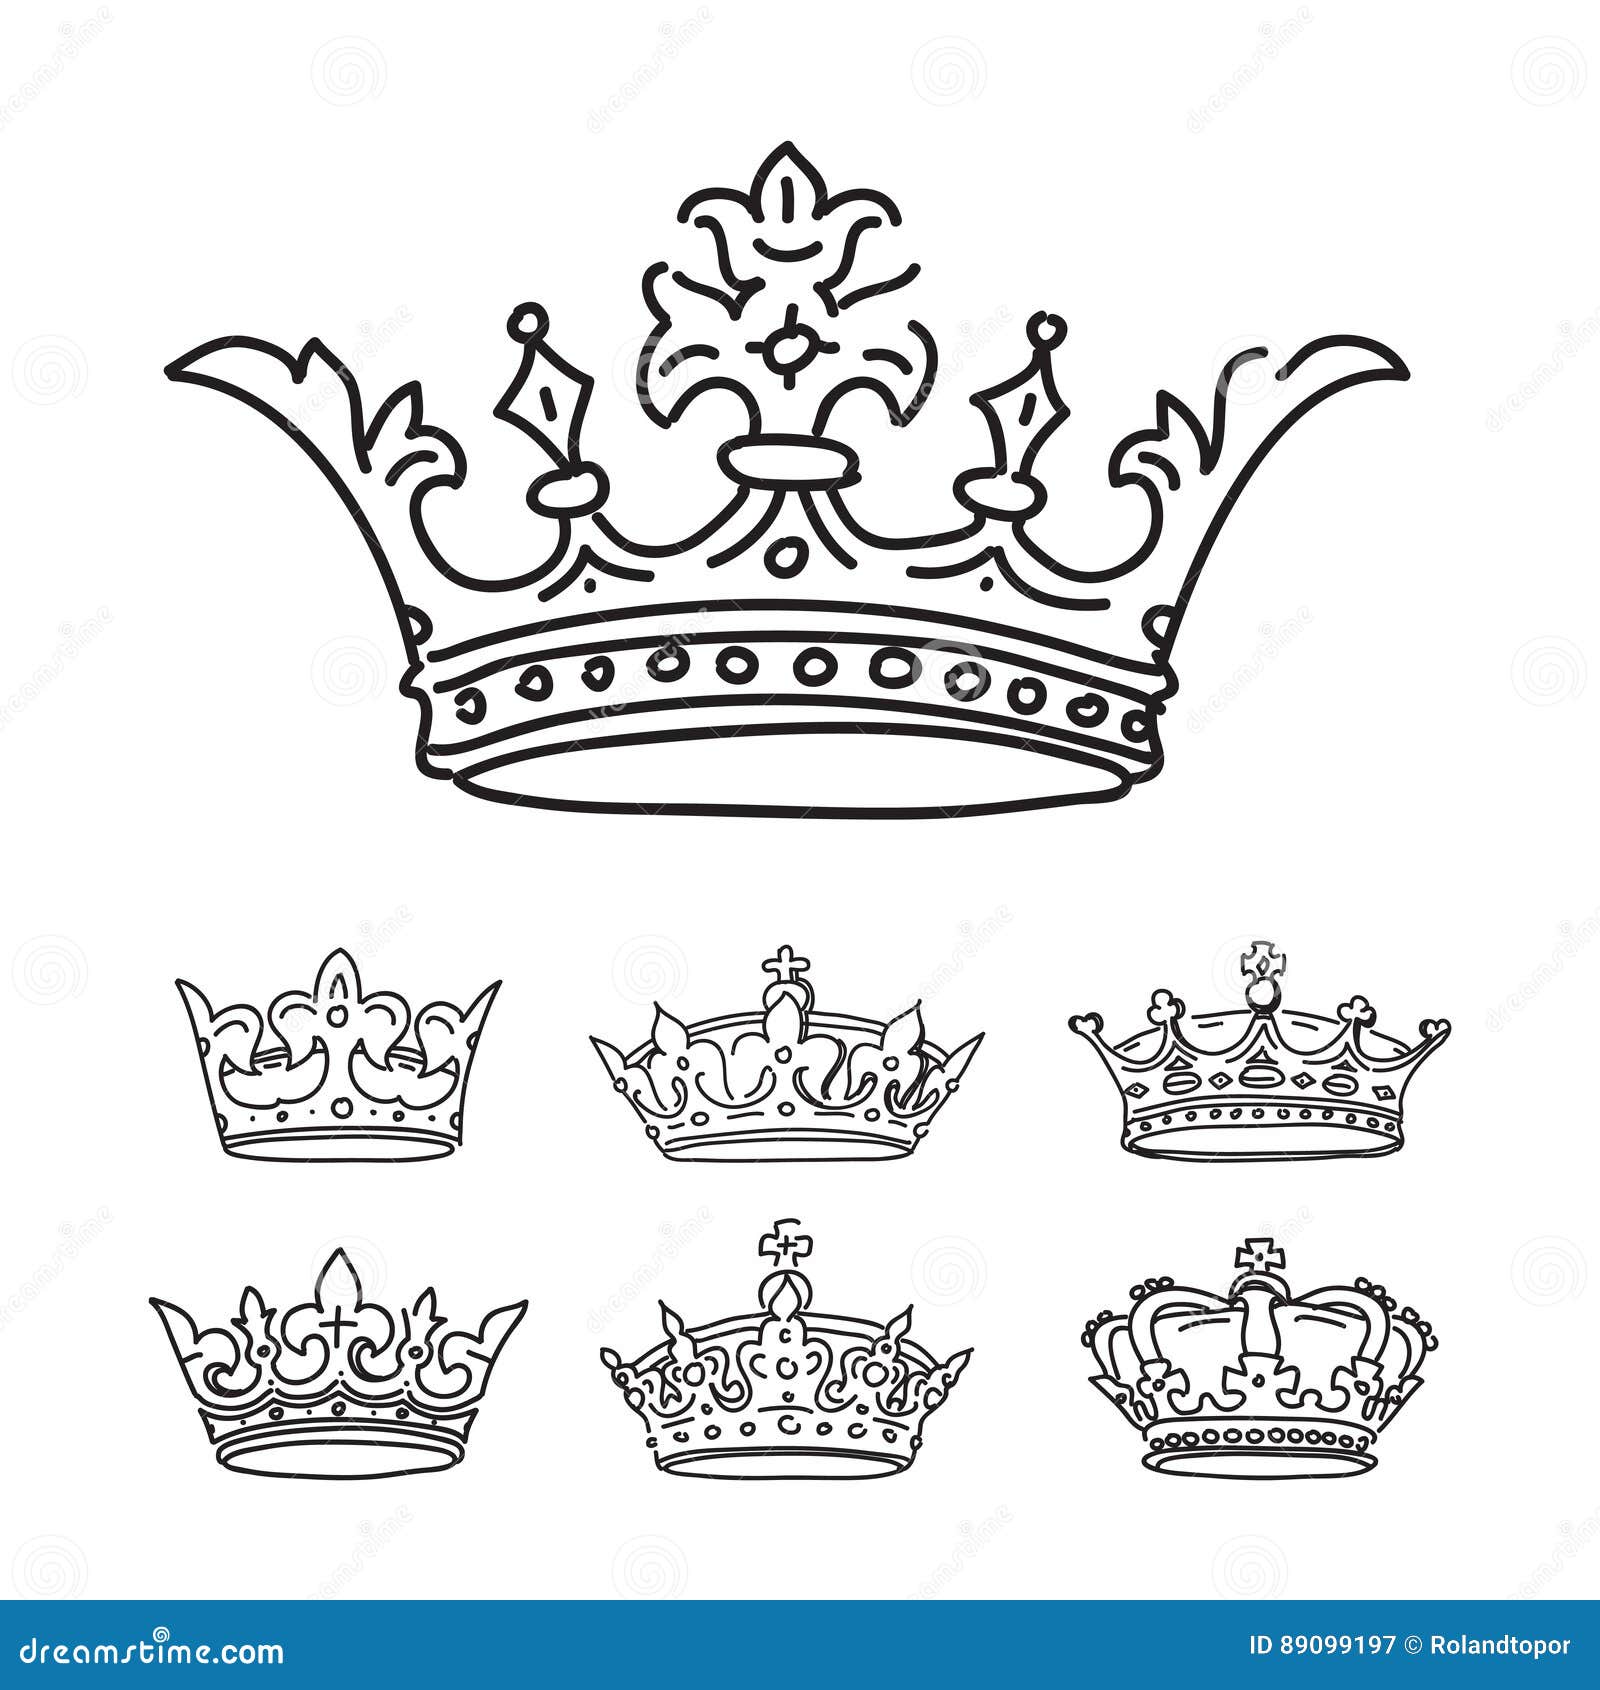 Set of Stylized Images of the Crowns. Vector Icons Stock Vector ...